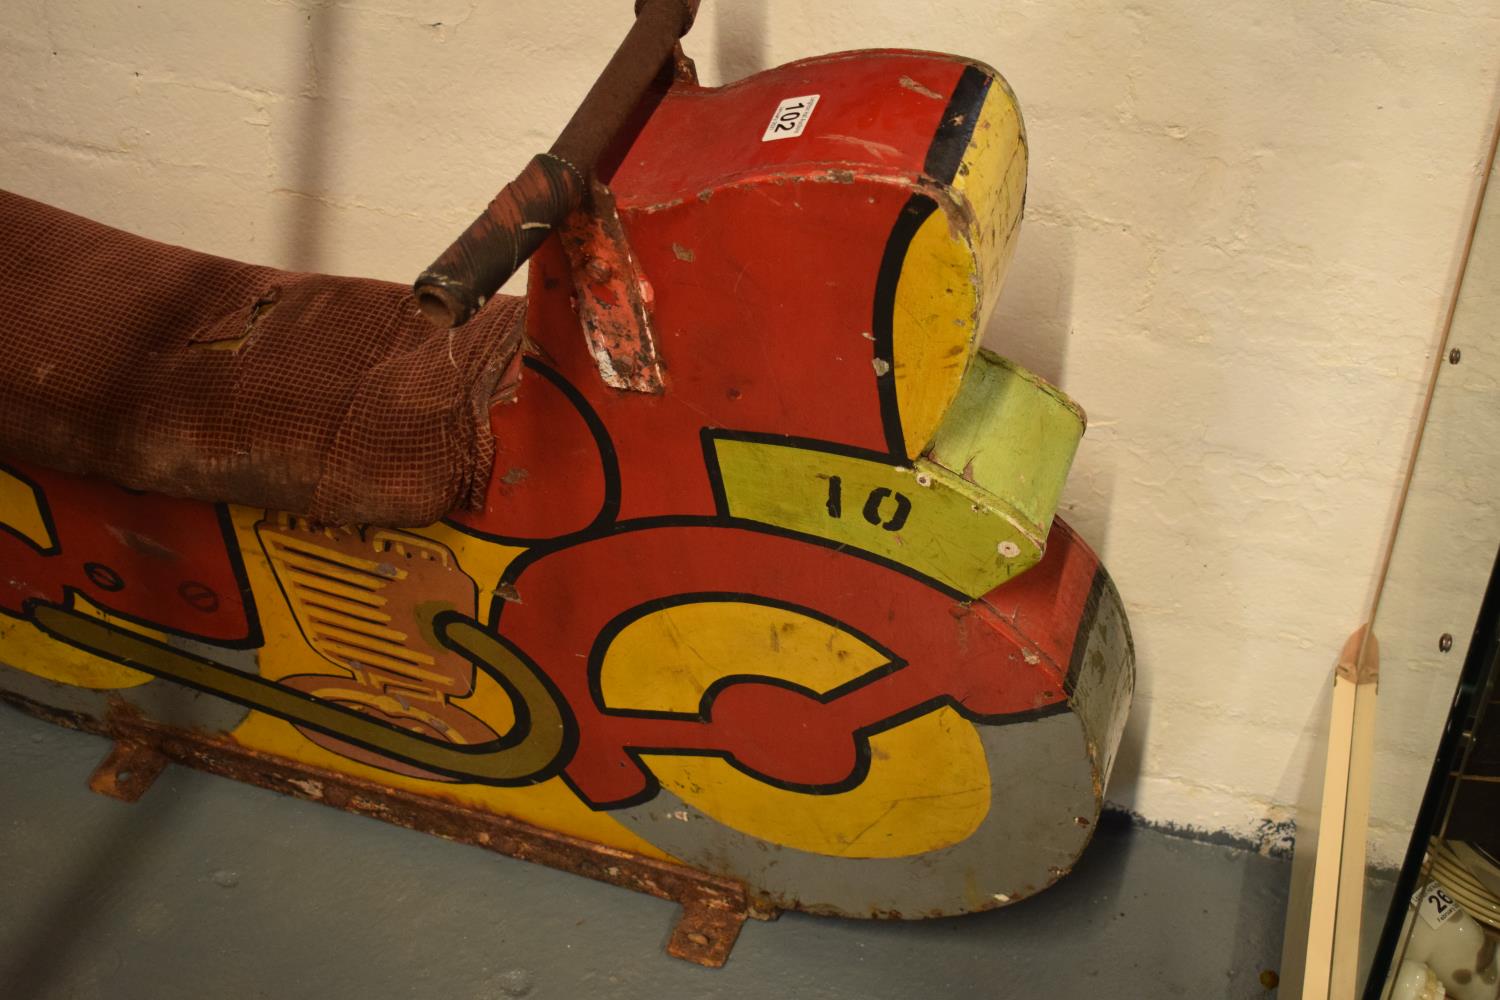 1950s speedway bike from a fairground ride - Image 8 of 8